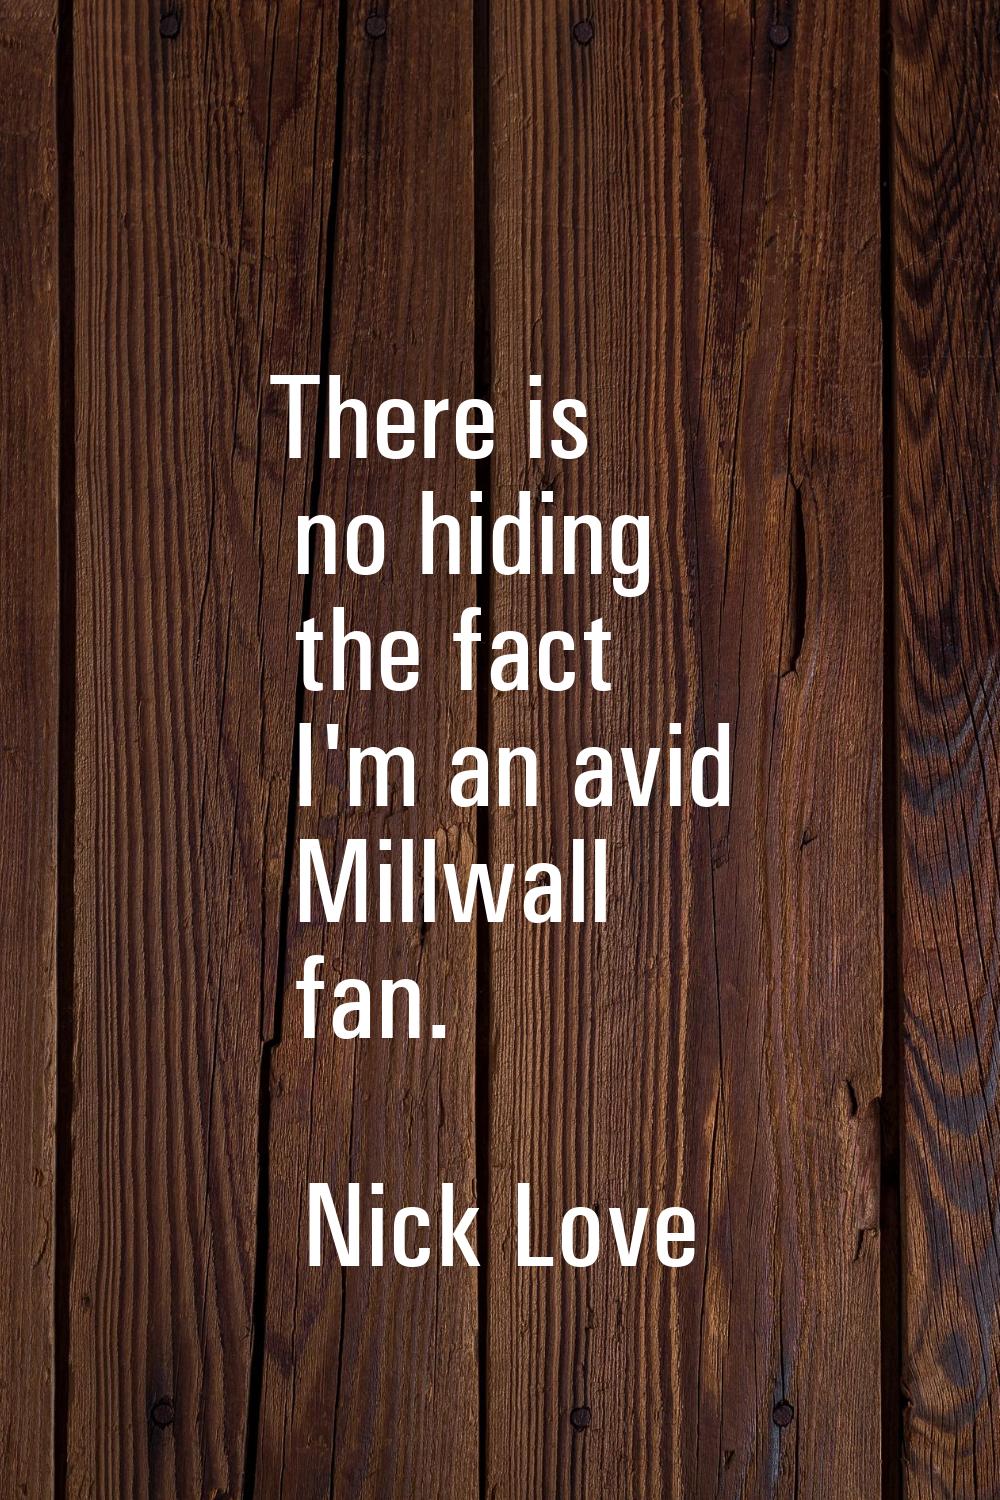 There is no hiding the fact I'm an avid Millwall fan.